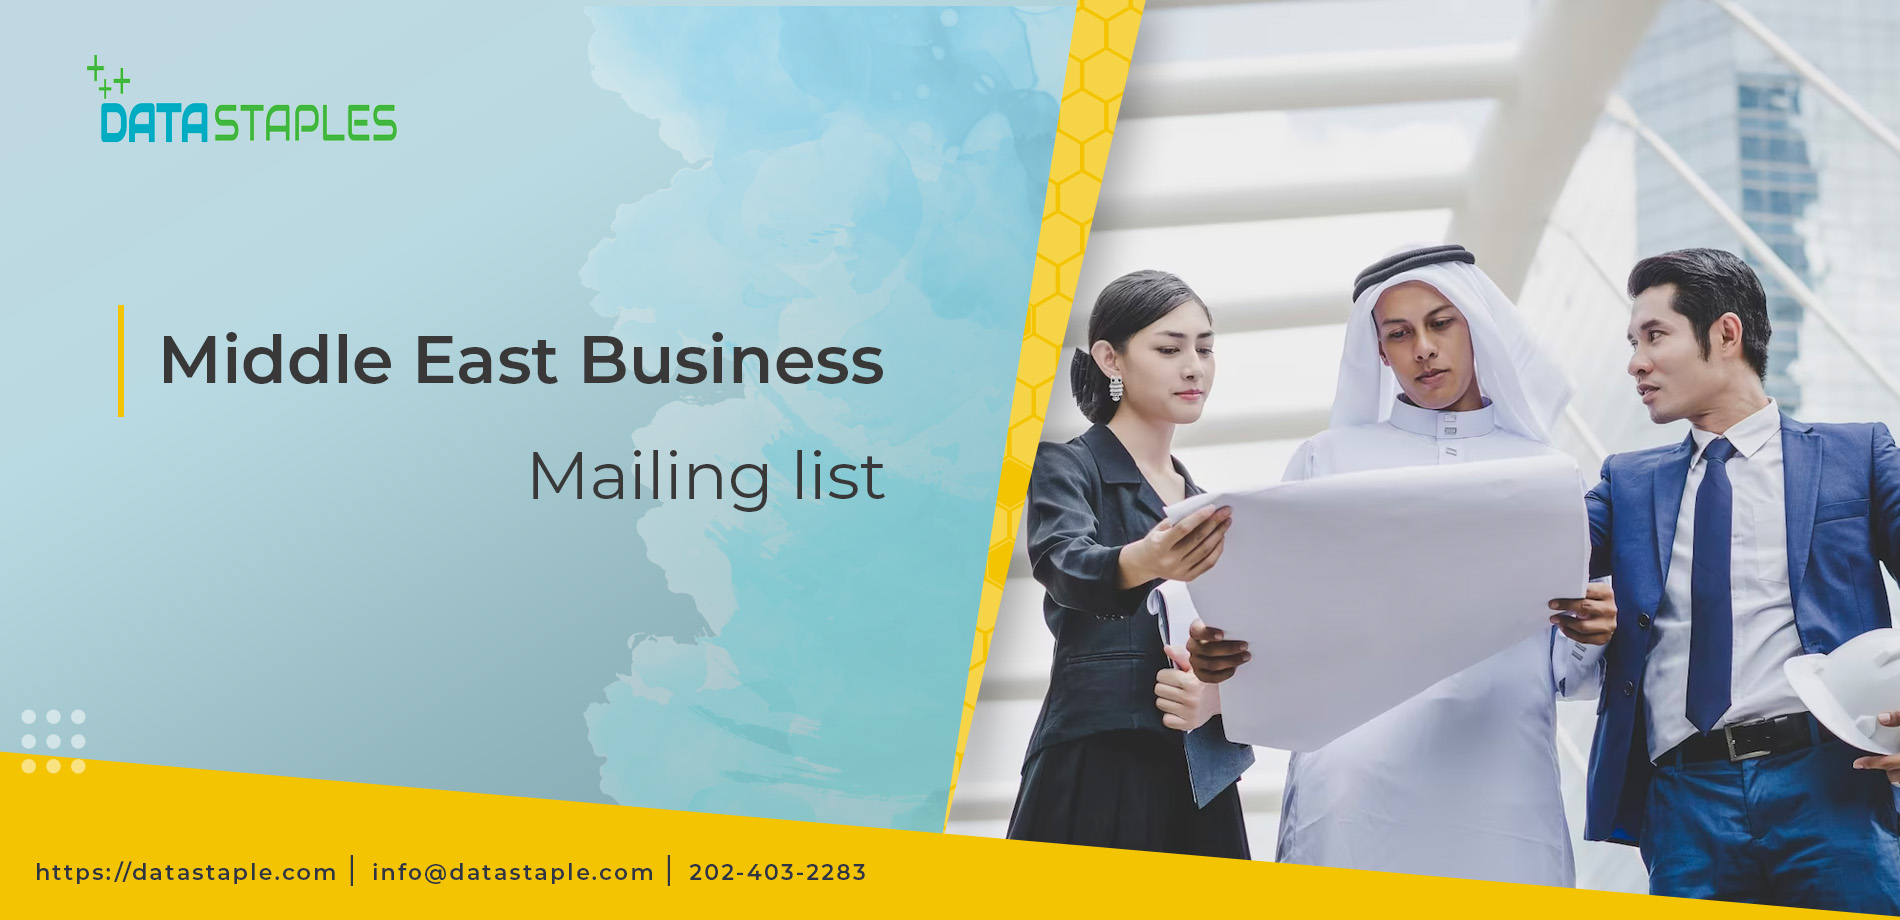 Middle East Business Mailing List | DataStaples